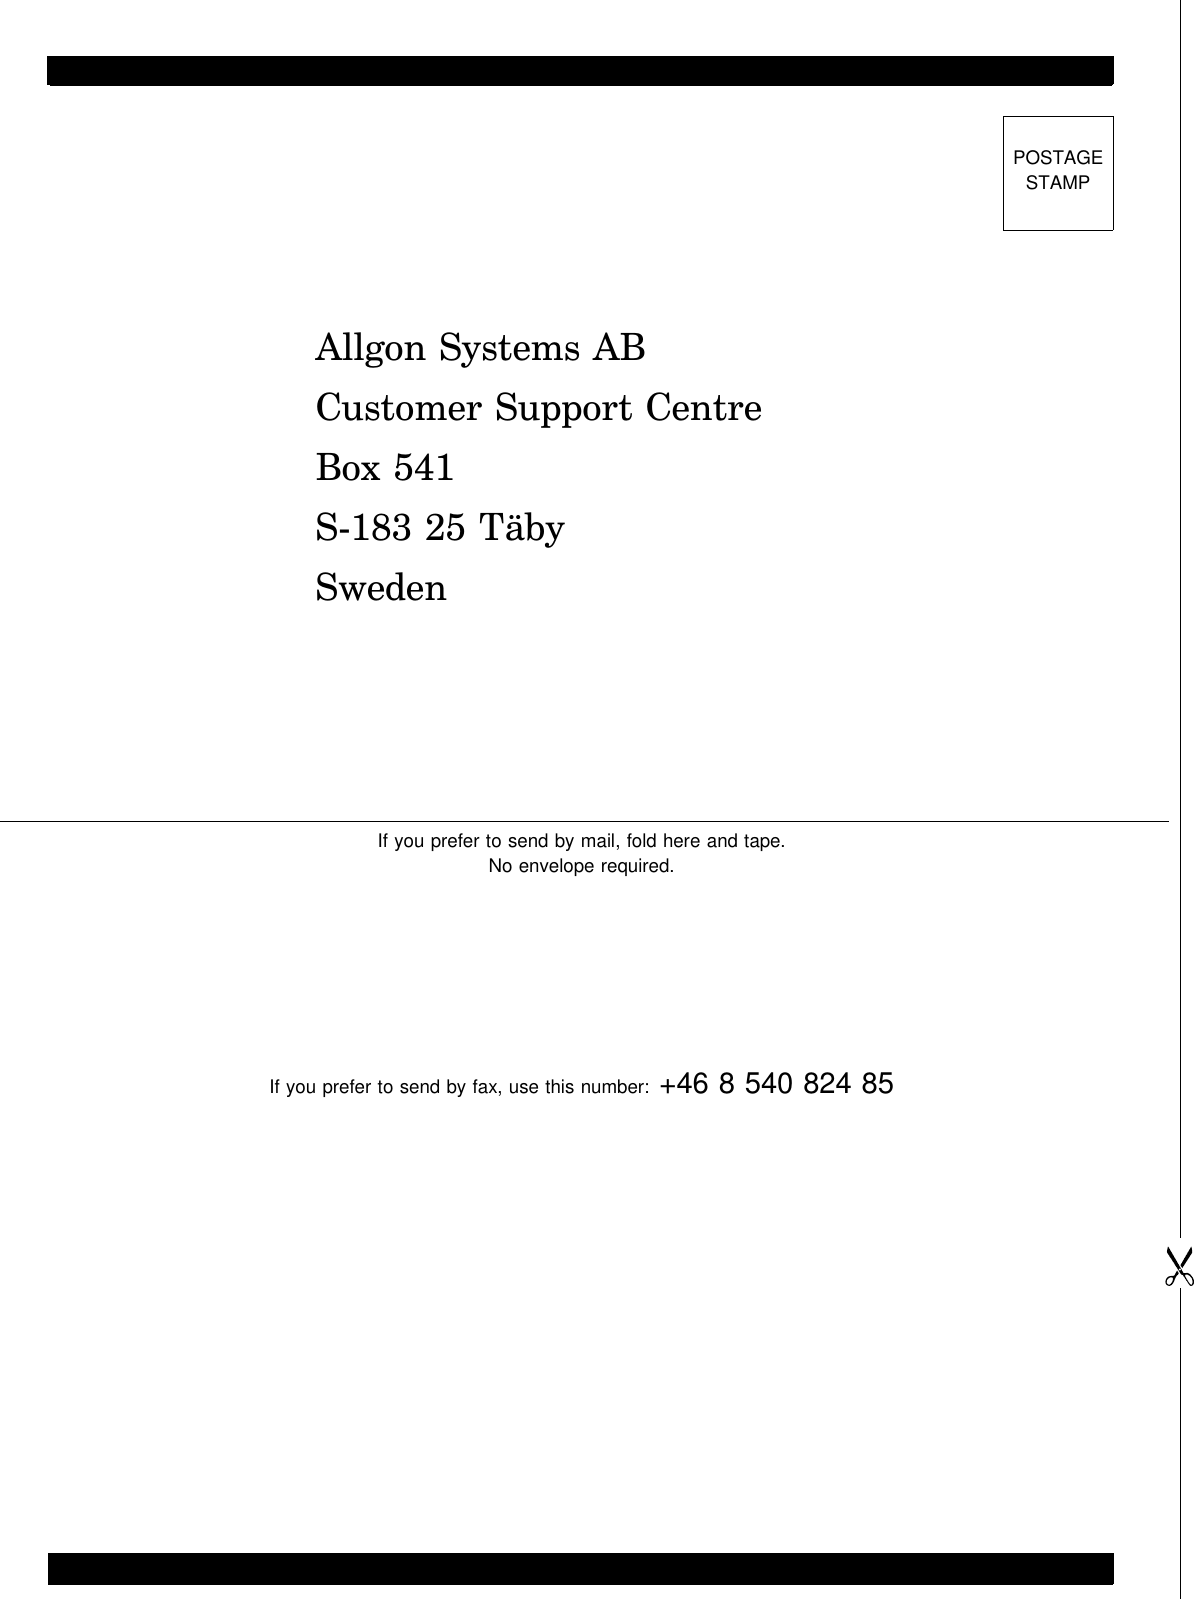 Allgon Systems ABCustomer Support CentreBox 541S-183 25 TäbySwedenIf you prefer to send by mail, fold here and tape.No envelope required.If you prefer to send by fax, use this number: +46 8 540 824 85POSTAGESTAMP Questionnaire ALR Compact Repeater ALLGON Systems ABQ - 2 Rev. P1D  2000-05 VD203 67/EN - User’s Manual